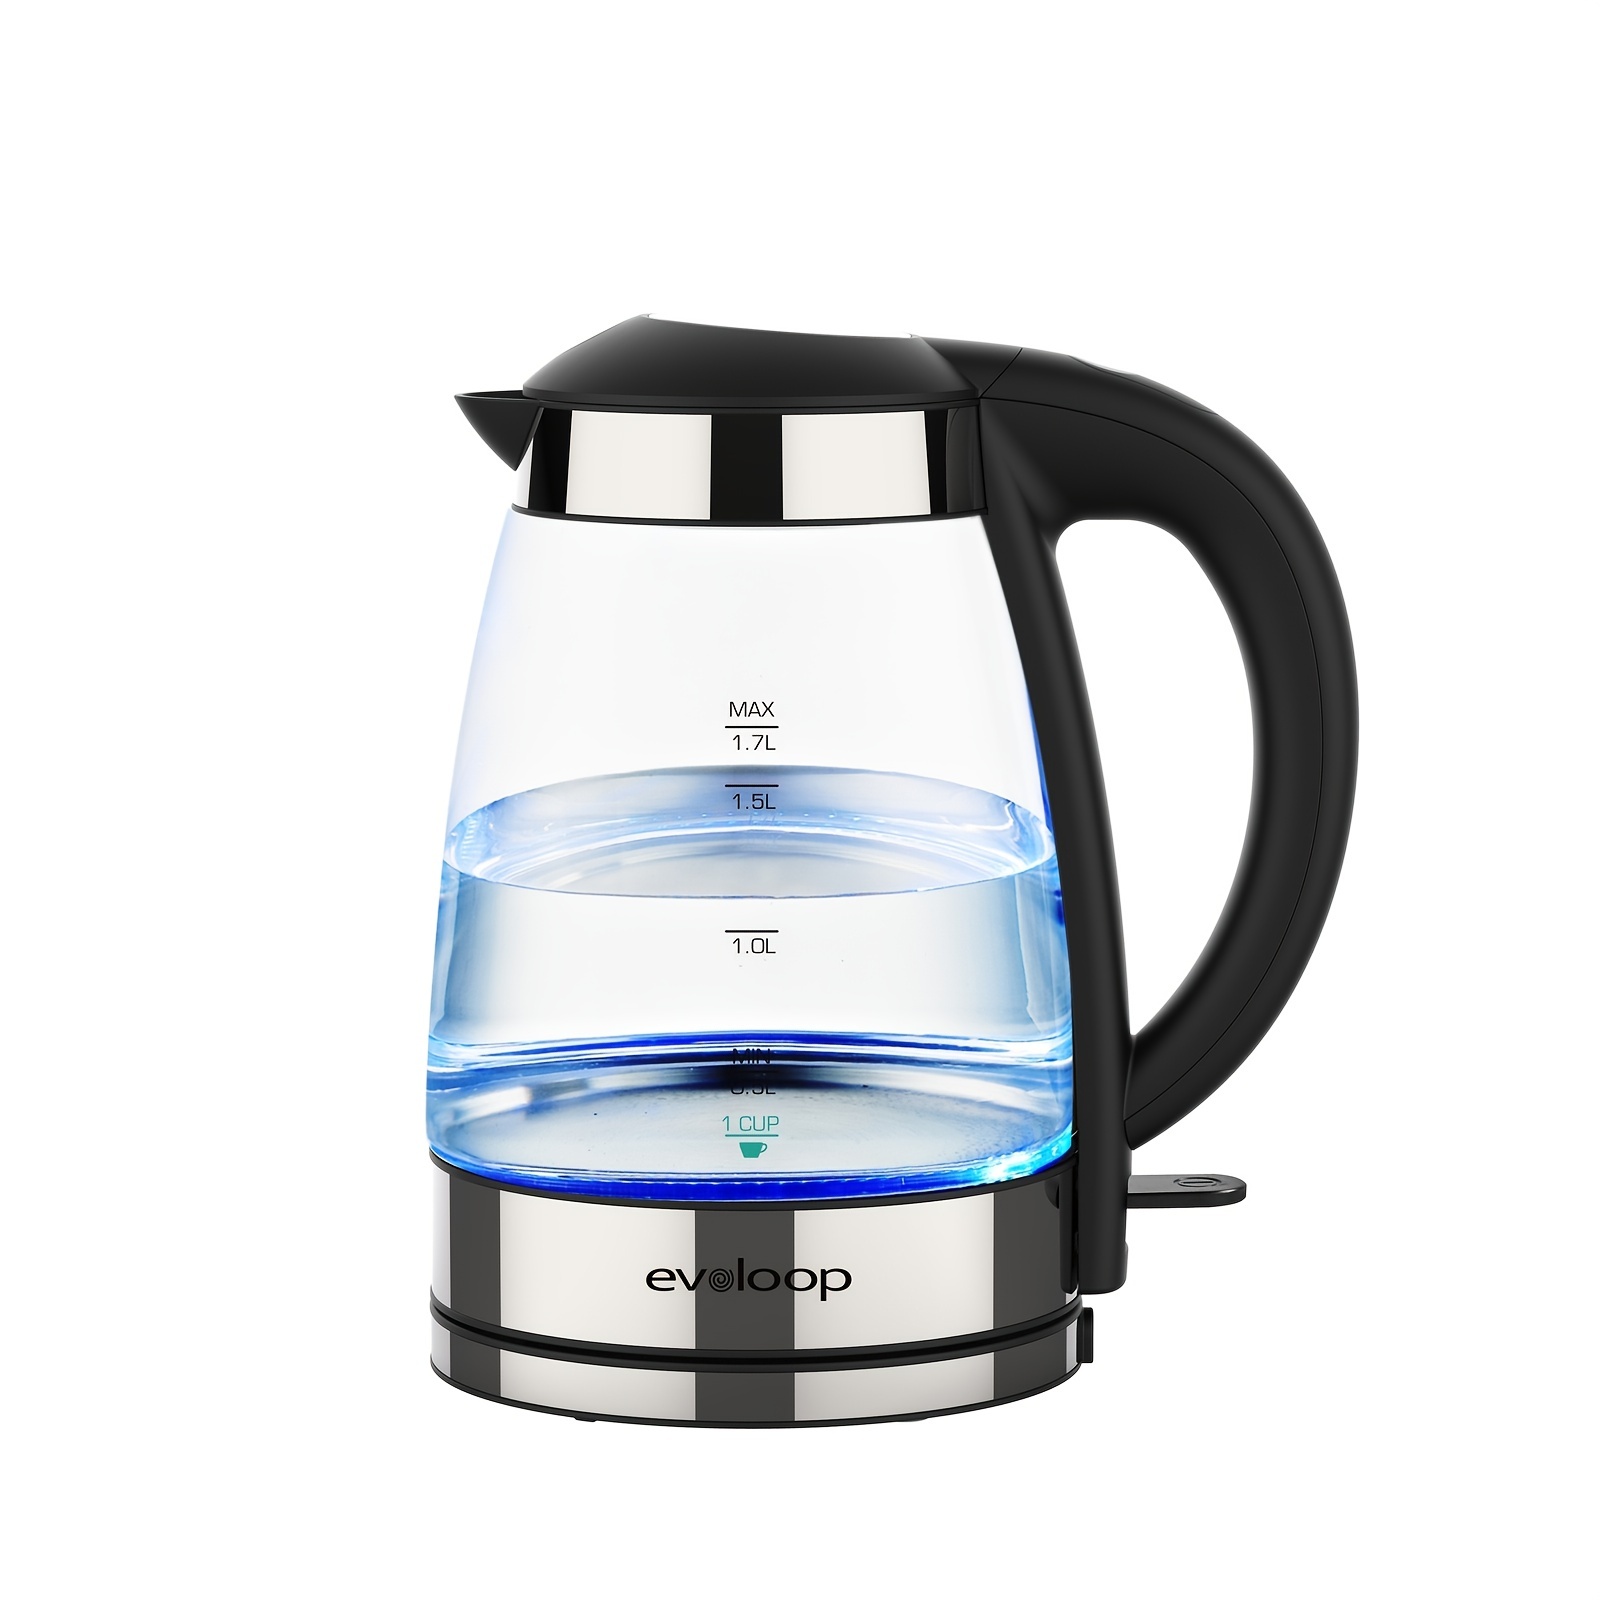  Evoloop Electric Tea Kettle 1.7L Hot Water Boiler, 1500W Glass Water  Kettle with Auto Shut-Off & Boil Dry Protection, BPA Free, Cordless Base &  LED Indicator: Home & Kitchen